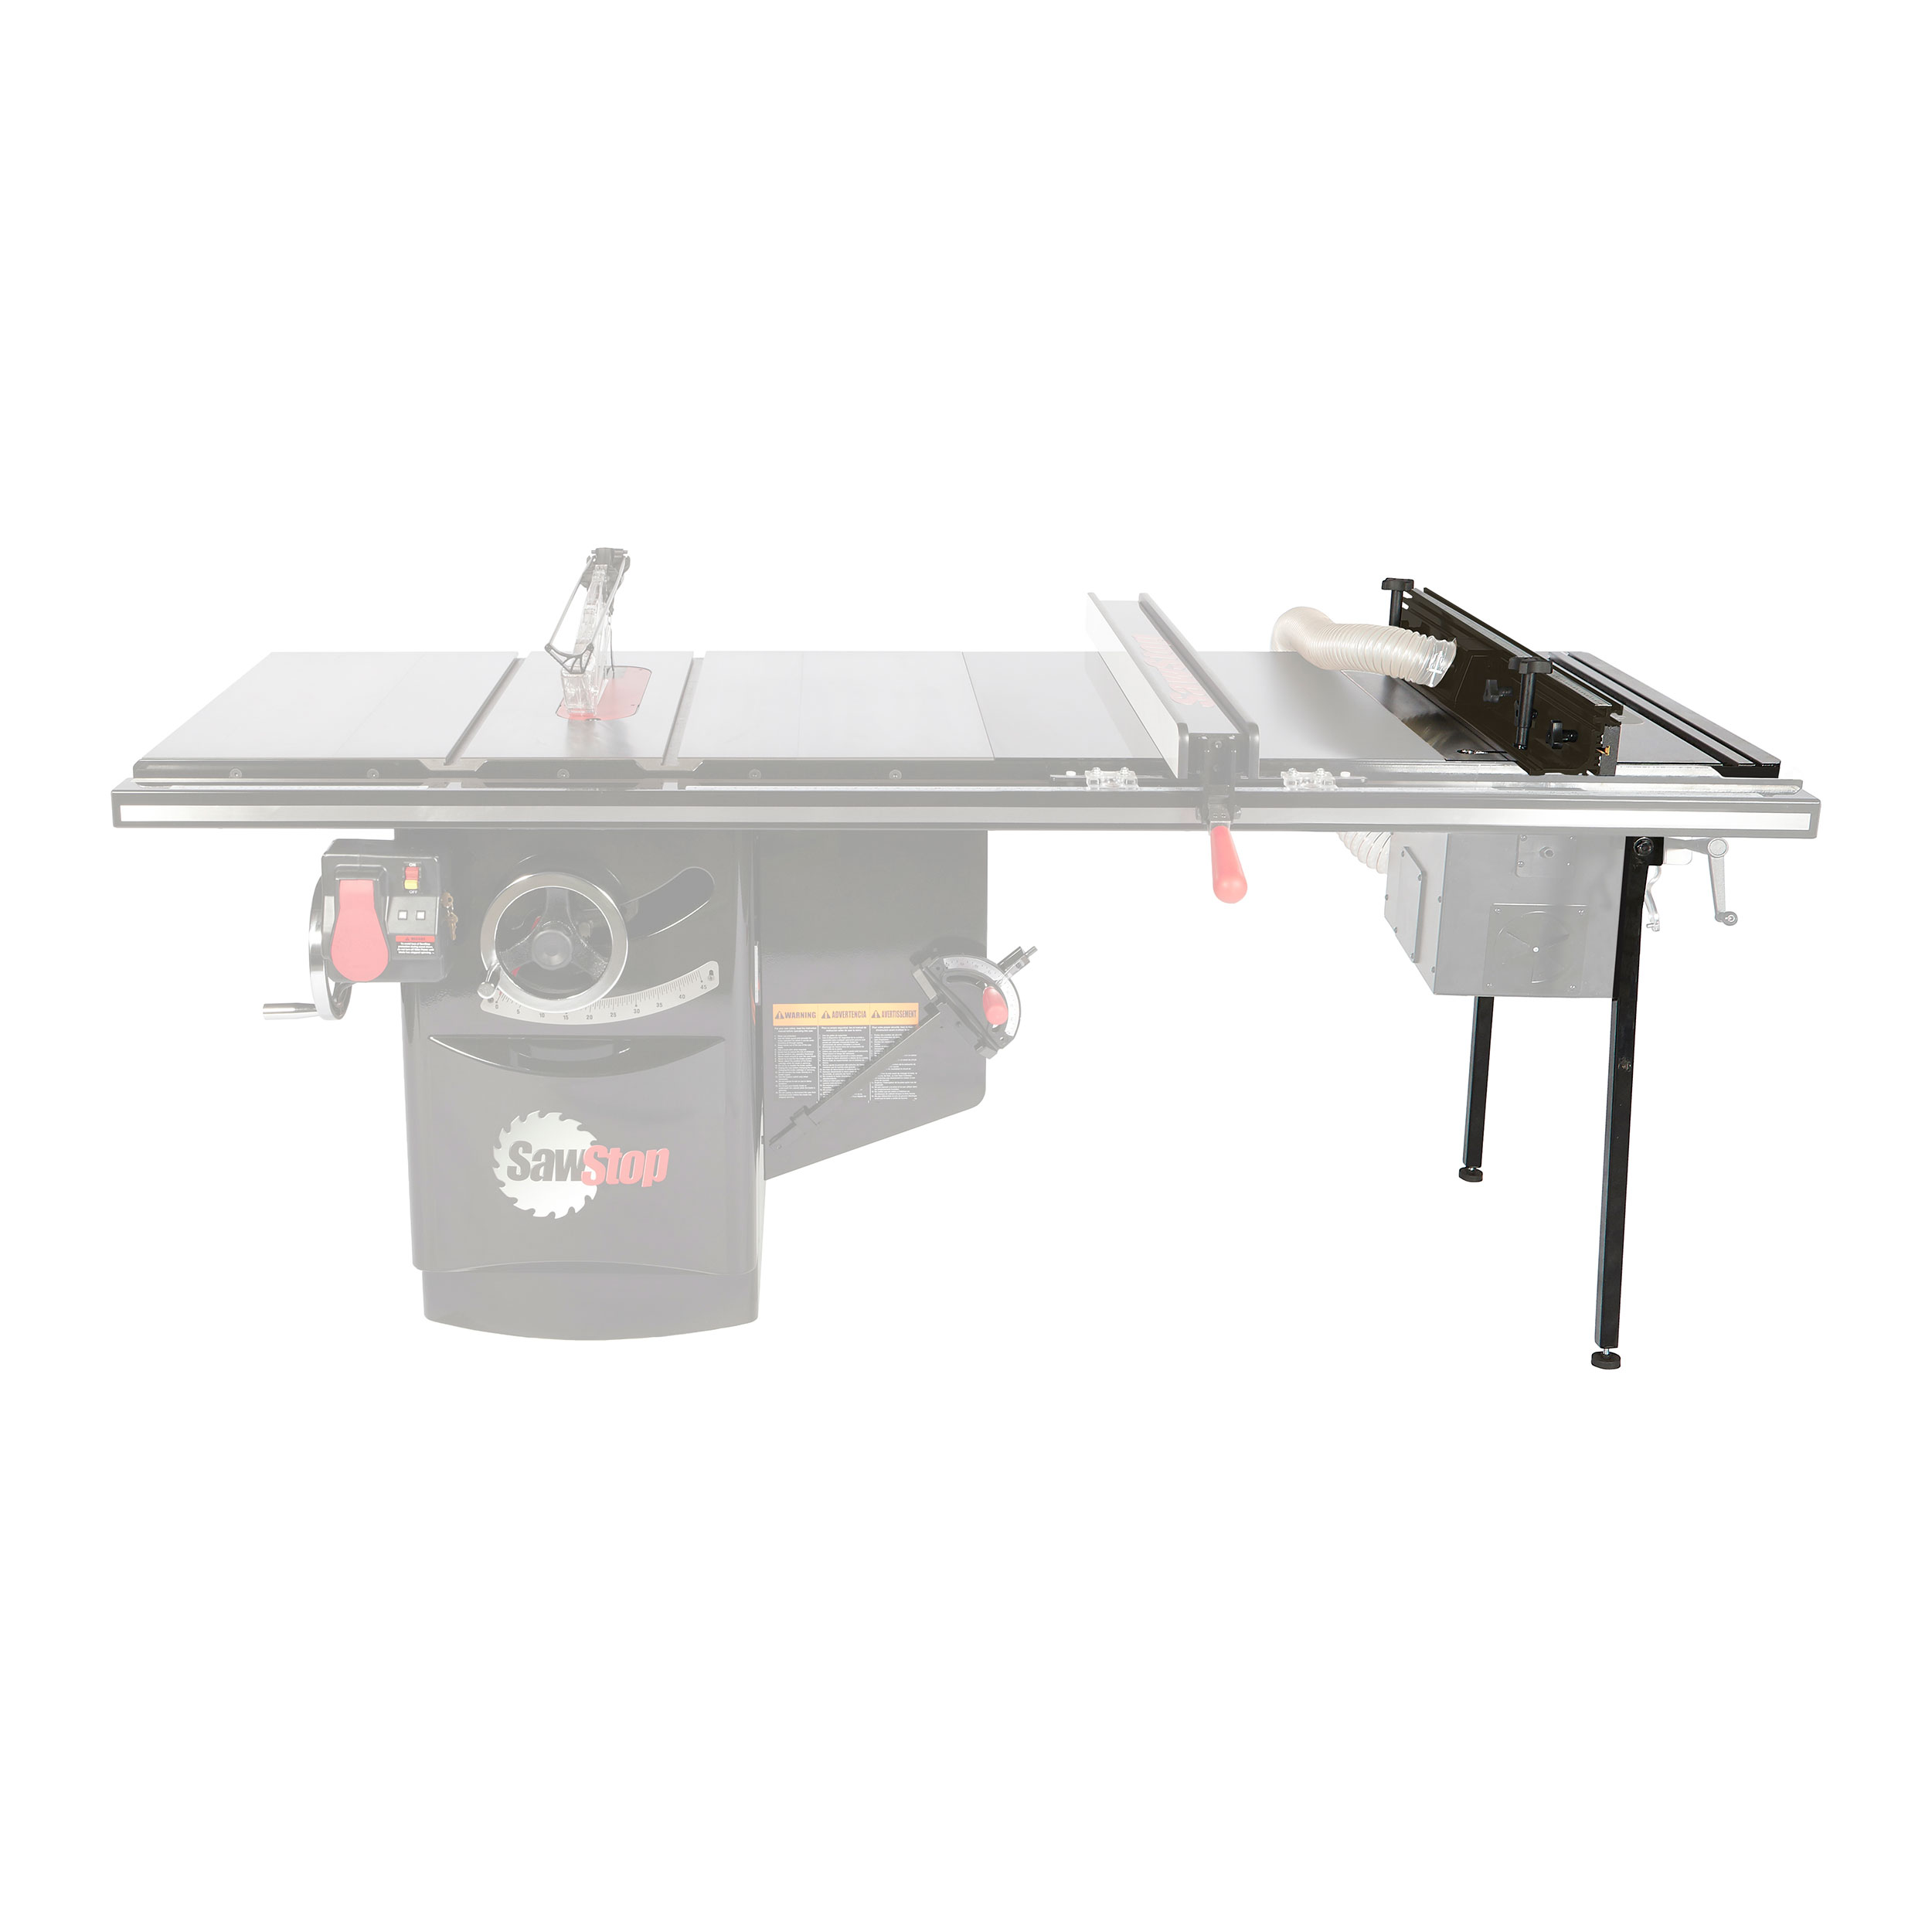 Ics 30" In-line Router Table Kit